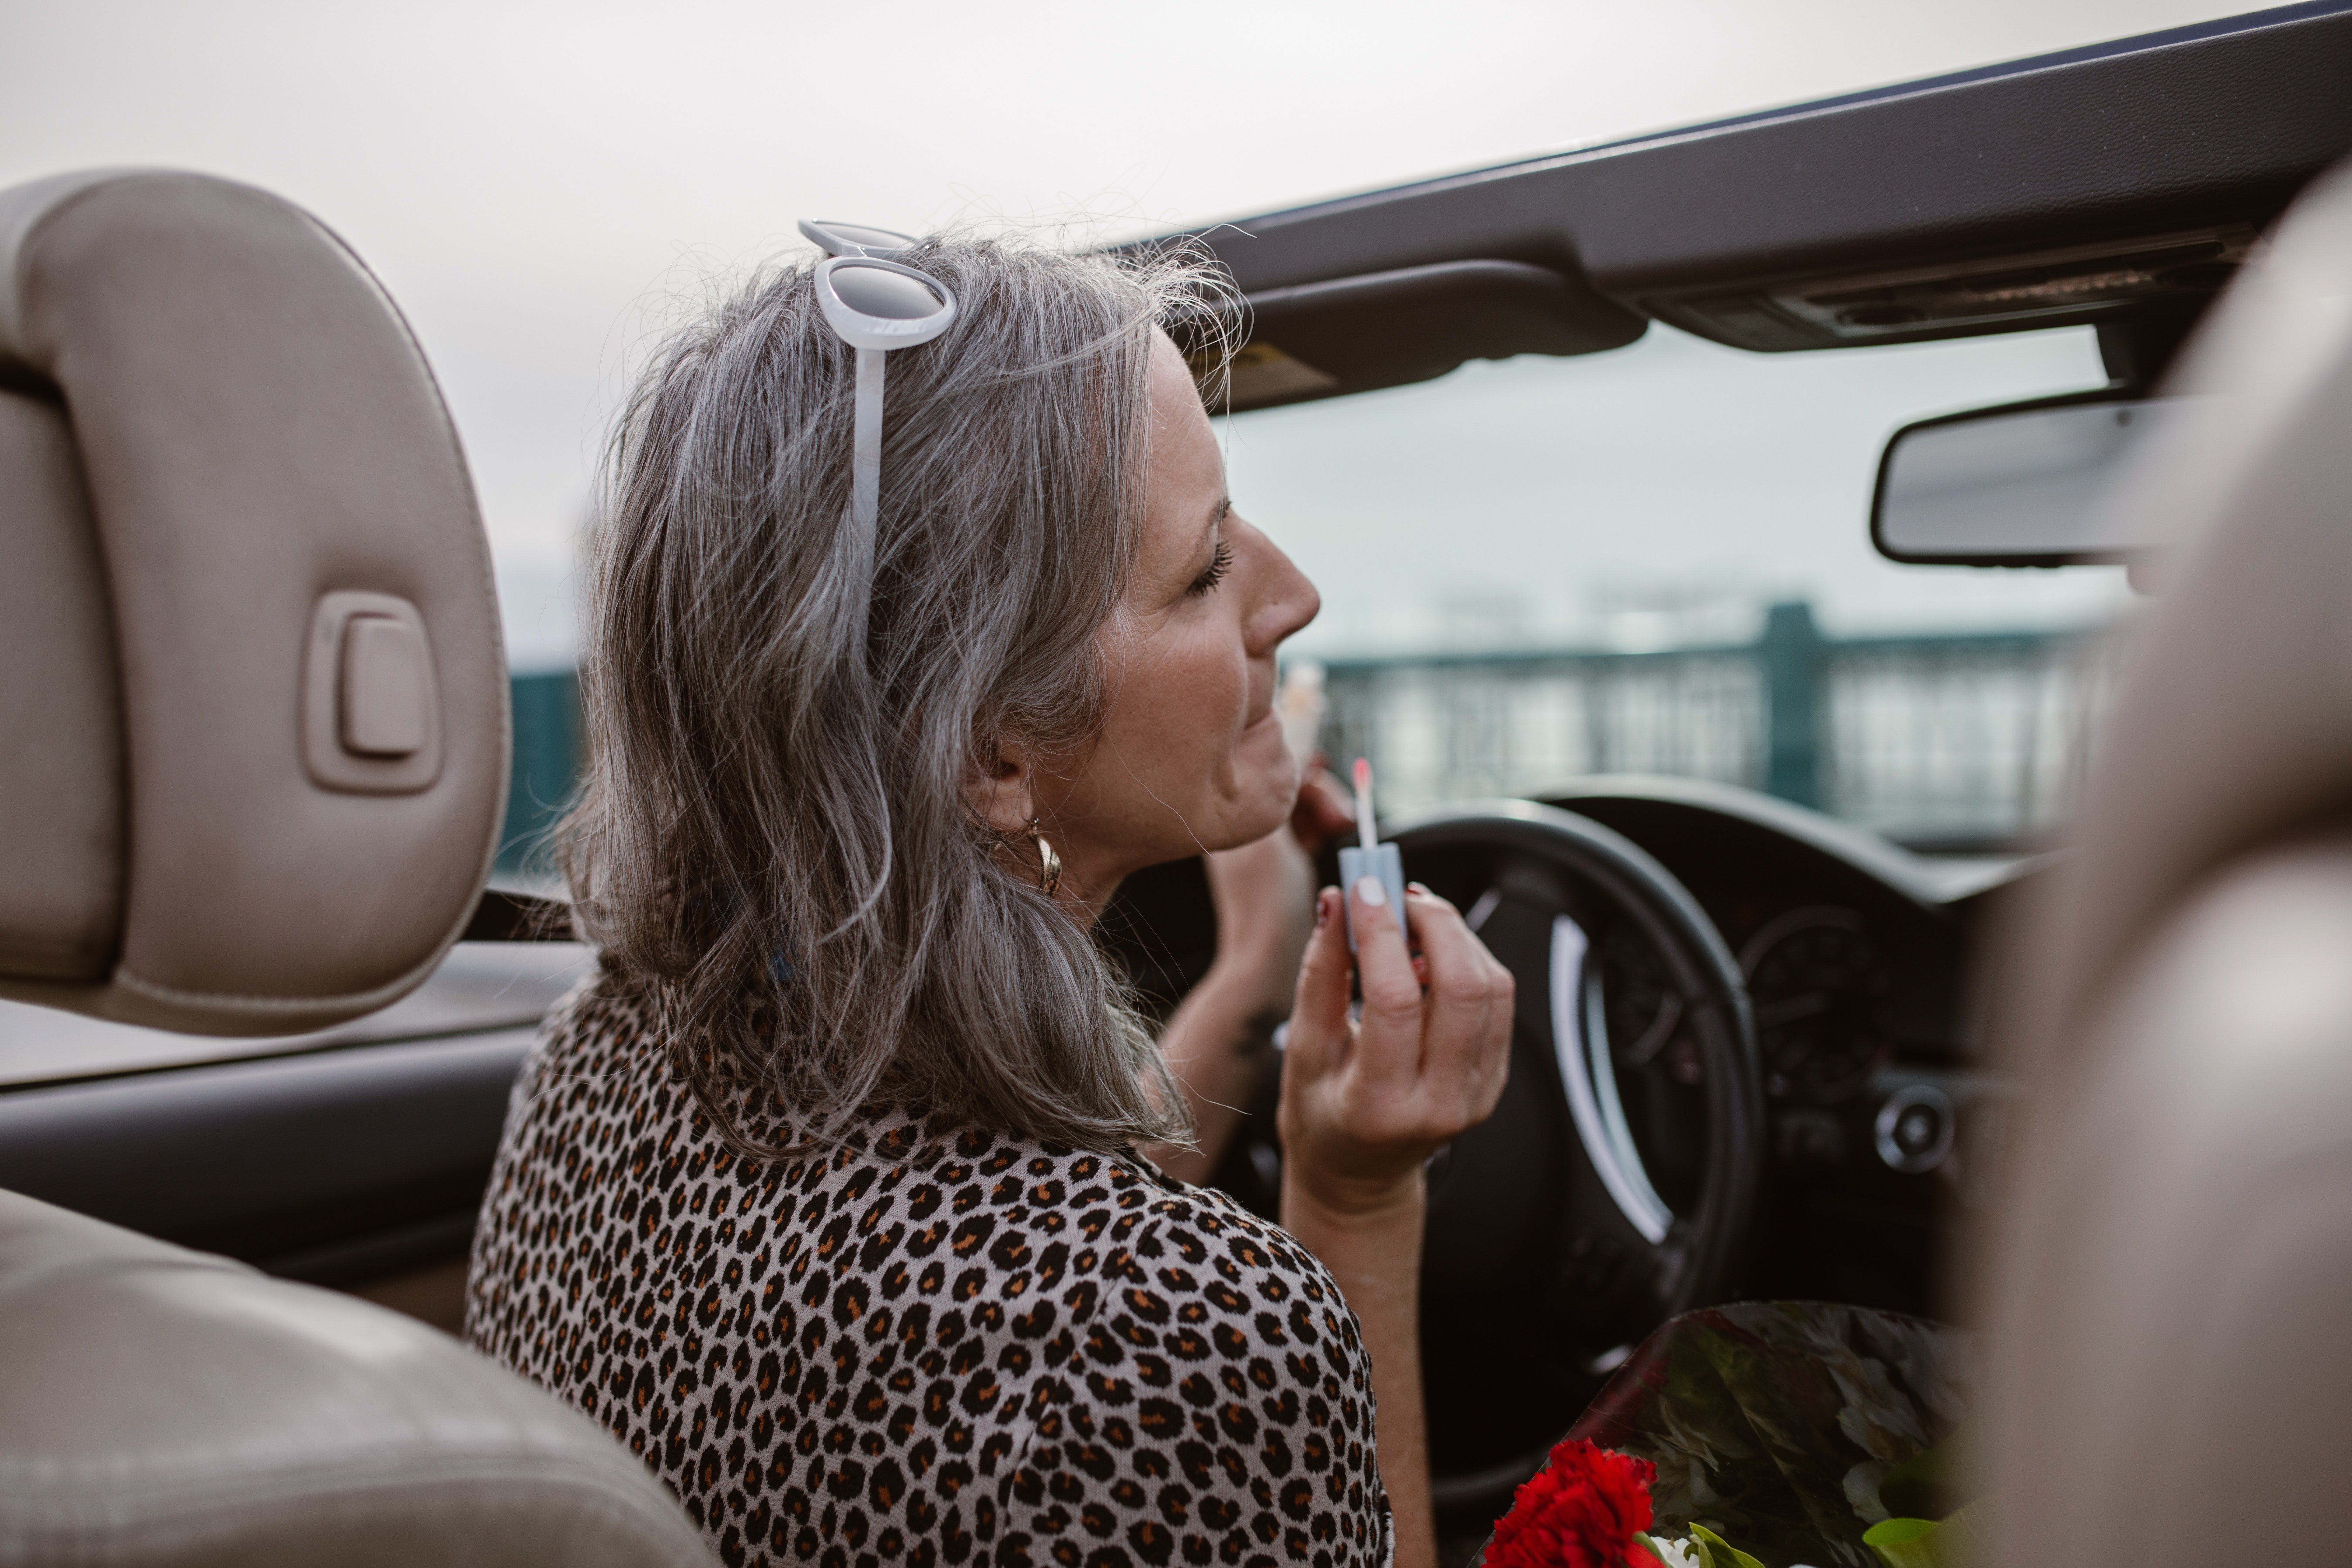 A woman applying lip gloss in a brand-new car | Source: Pexels